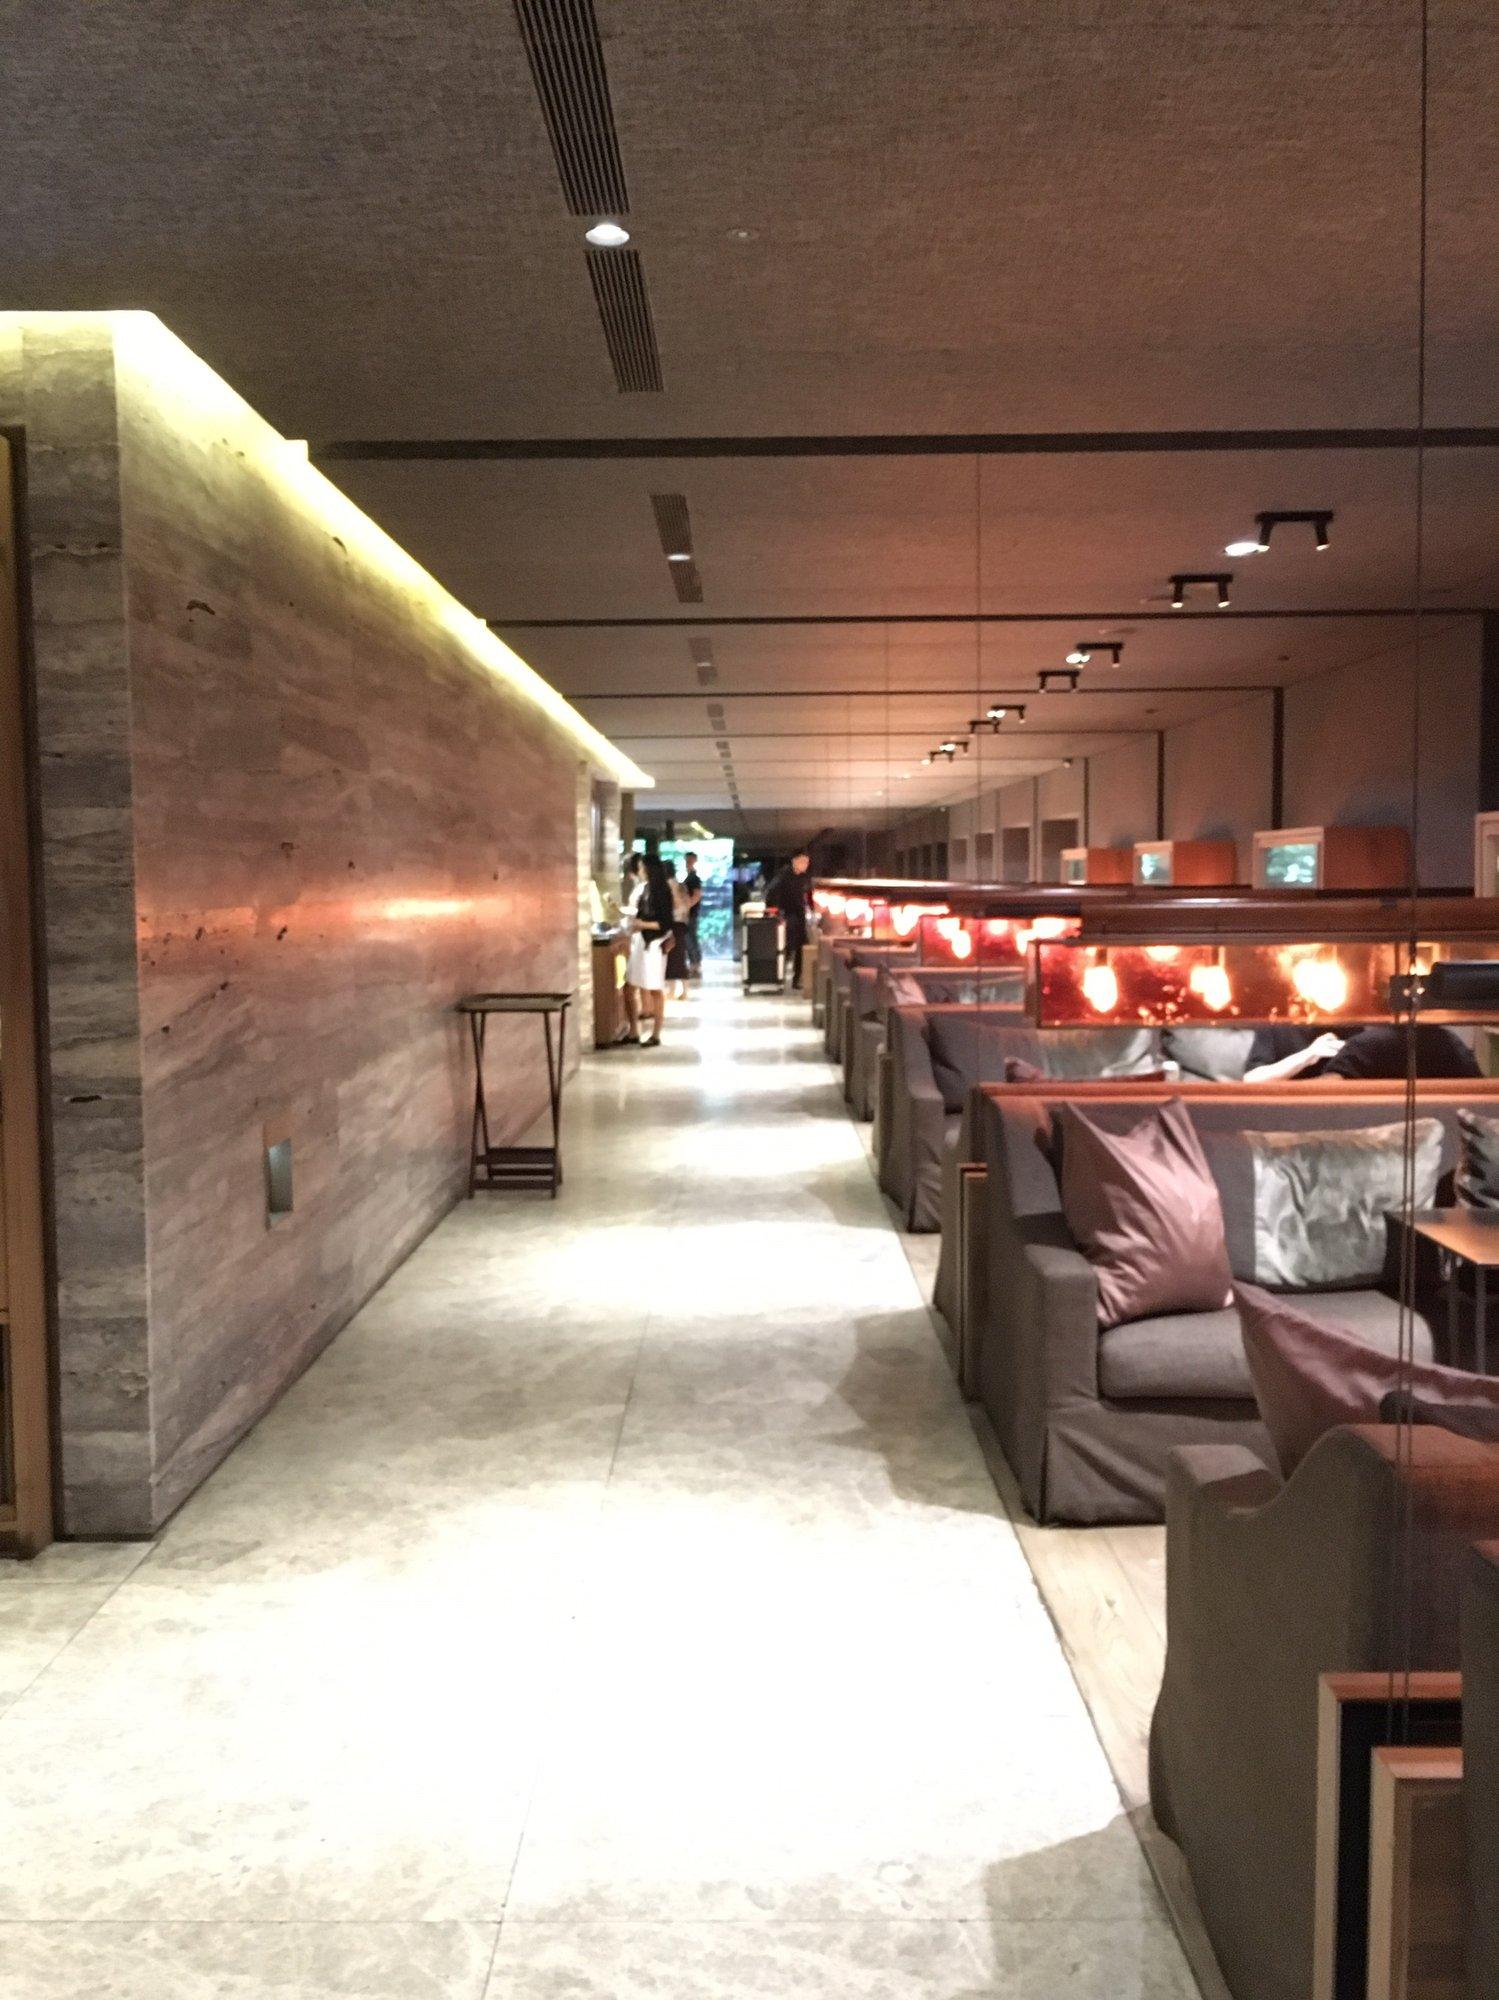 China Airlines Lounge (V1) image 34 of 44